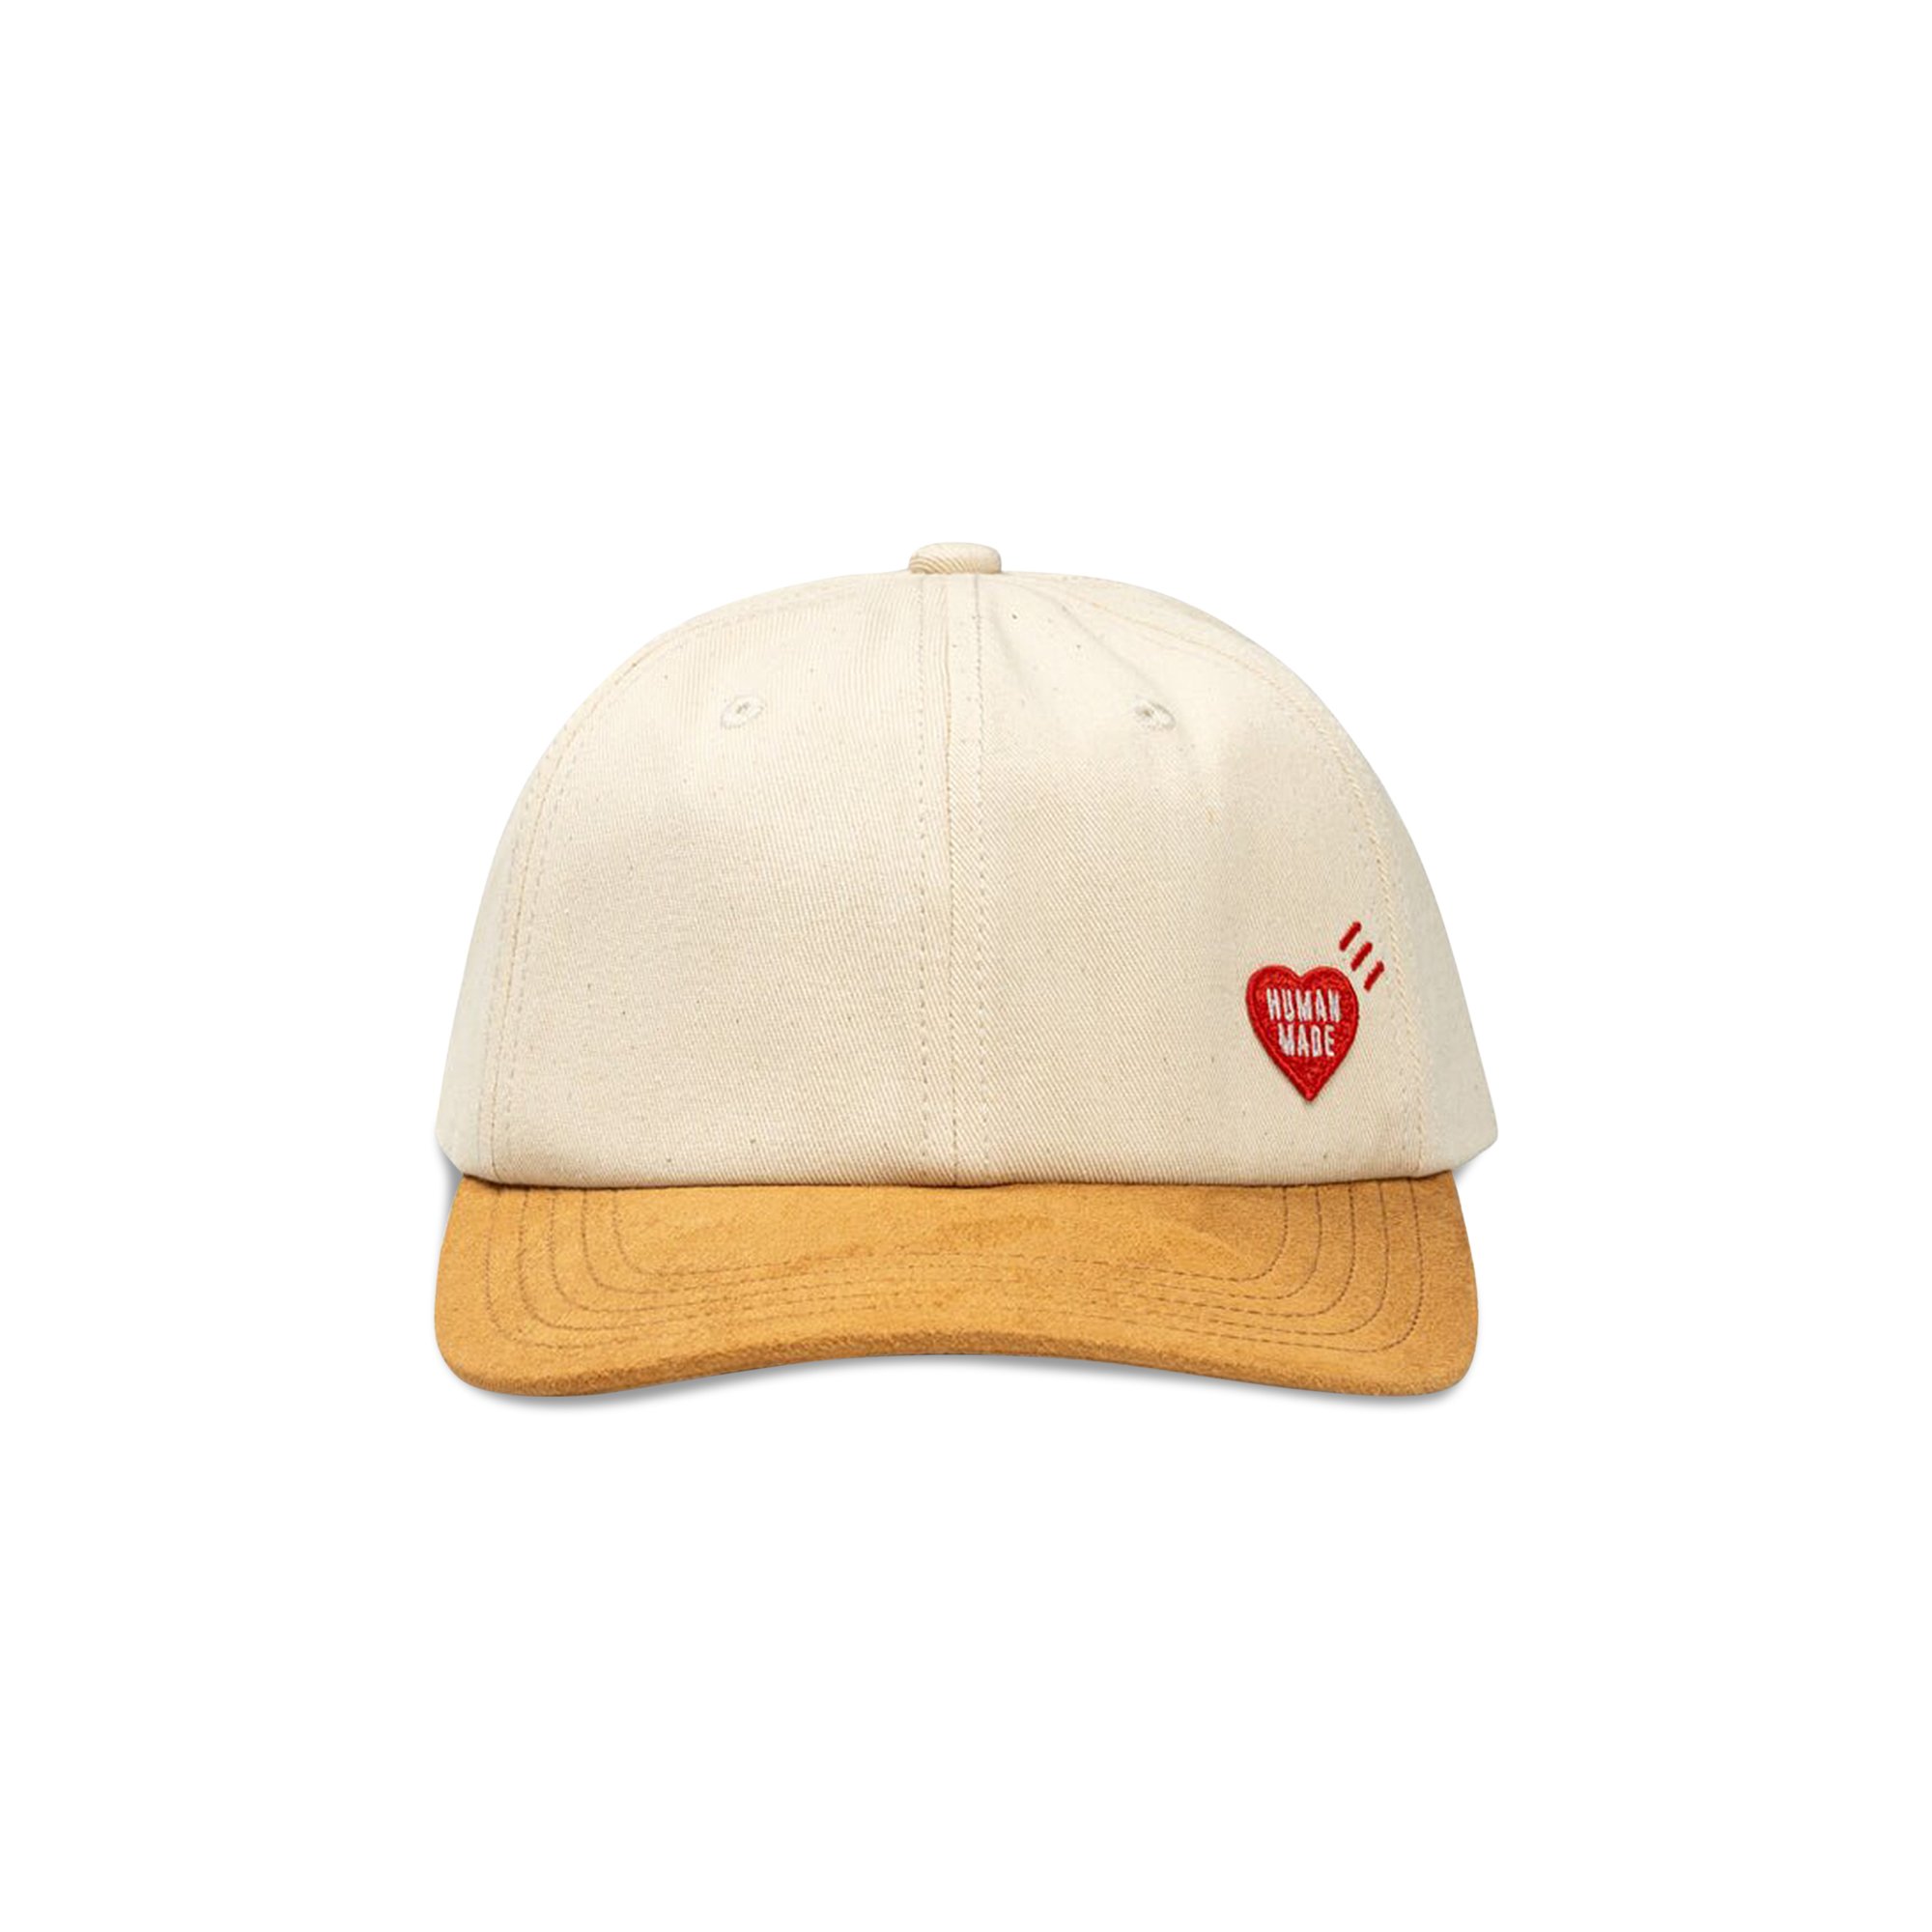 Buy Human Made 6 Panel Twill Cap 'White' - HM26GD009 WHIT | GOAT CA